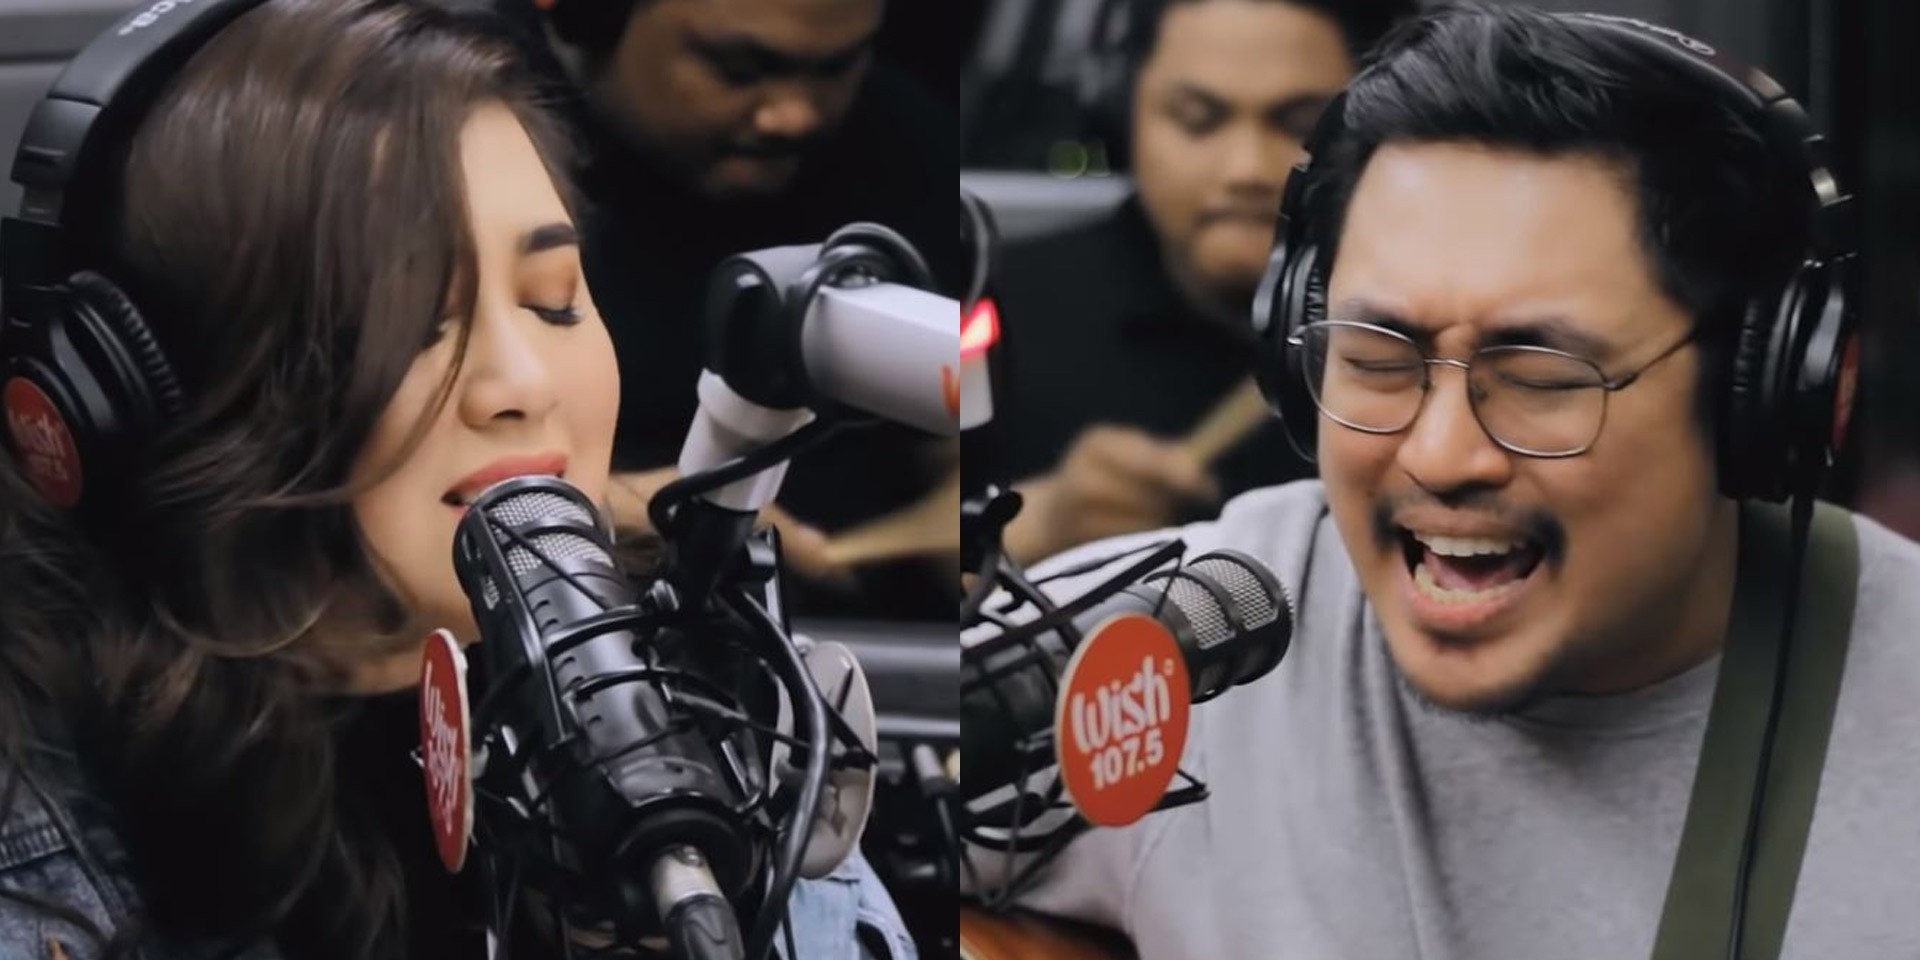 December Avenue & Moira Dela Torre perform 'Kung 'Di Rin Lang Ikaw' live on Wish 107.5 Bus – watch